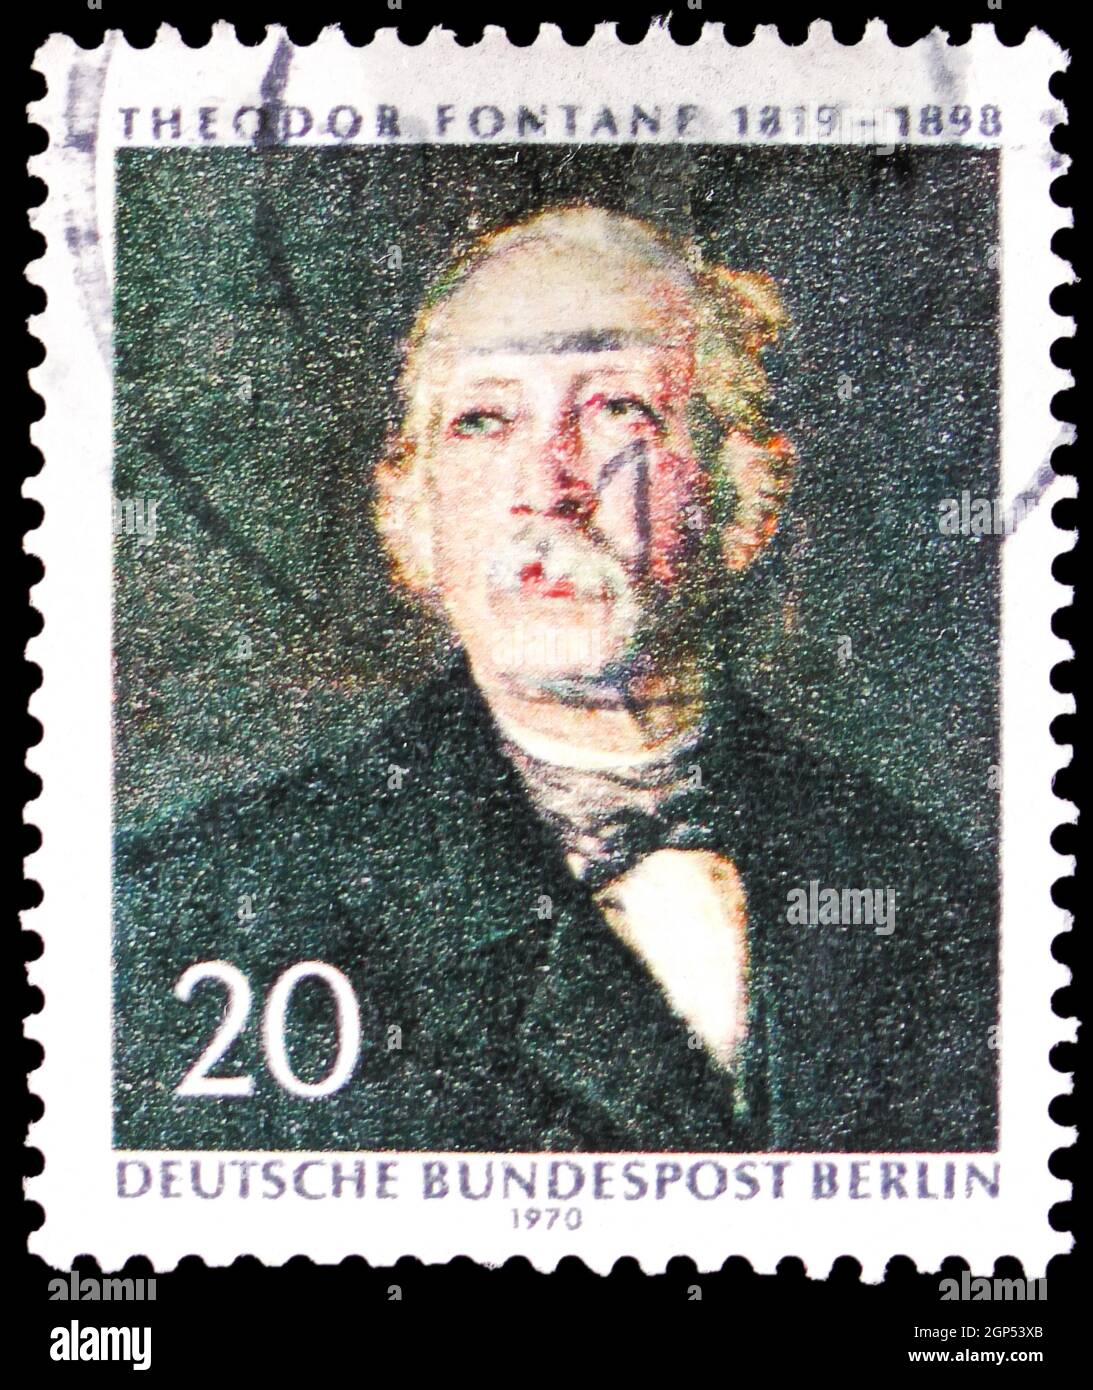 MOSCOW, RUSSIA - AUGUST 5, 2021: Postage stamp printed in Germany shows Theodor Fontane (1819-1898), painting by Hanns Fechner, serie, circa 1970 Stock Photo